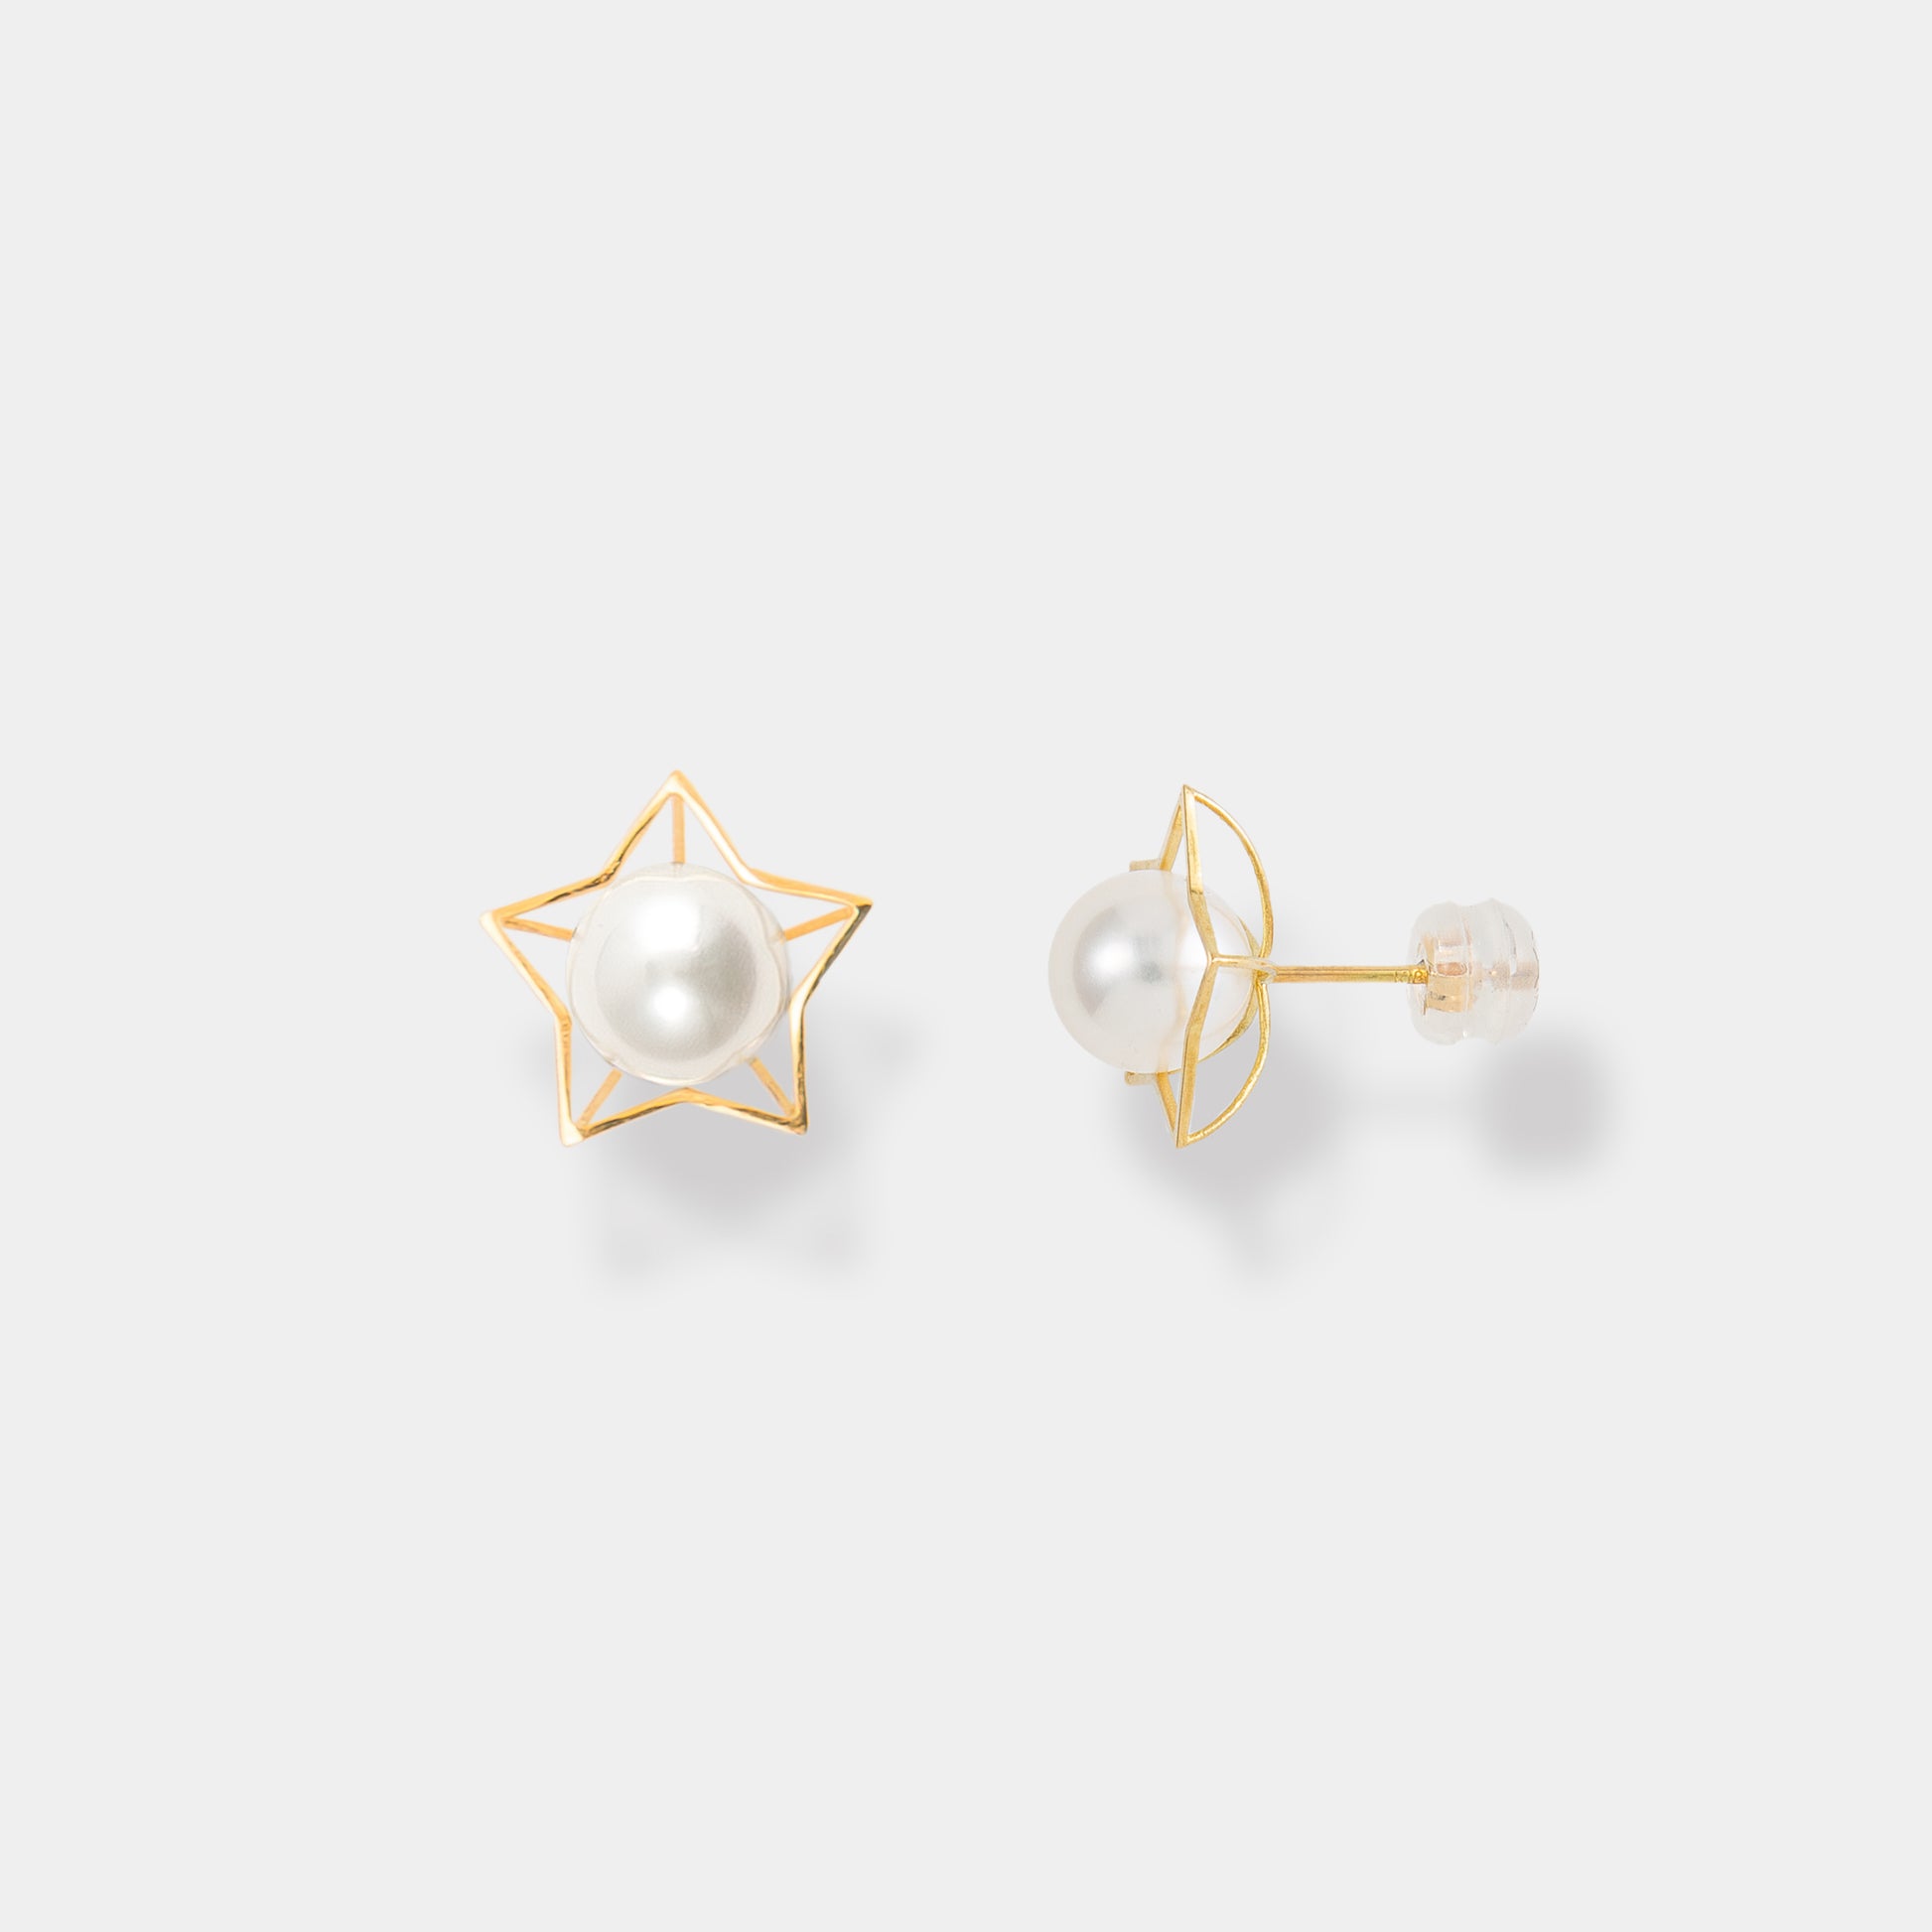 Elevate your style with these chic gold star stud earrings adorned with a classic pearl detail.